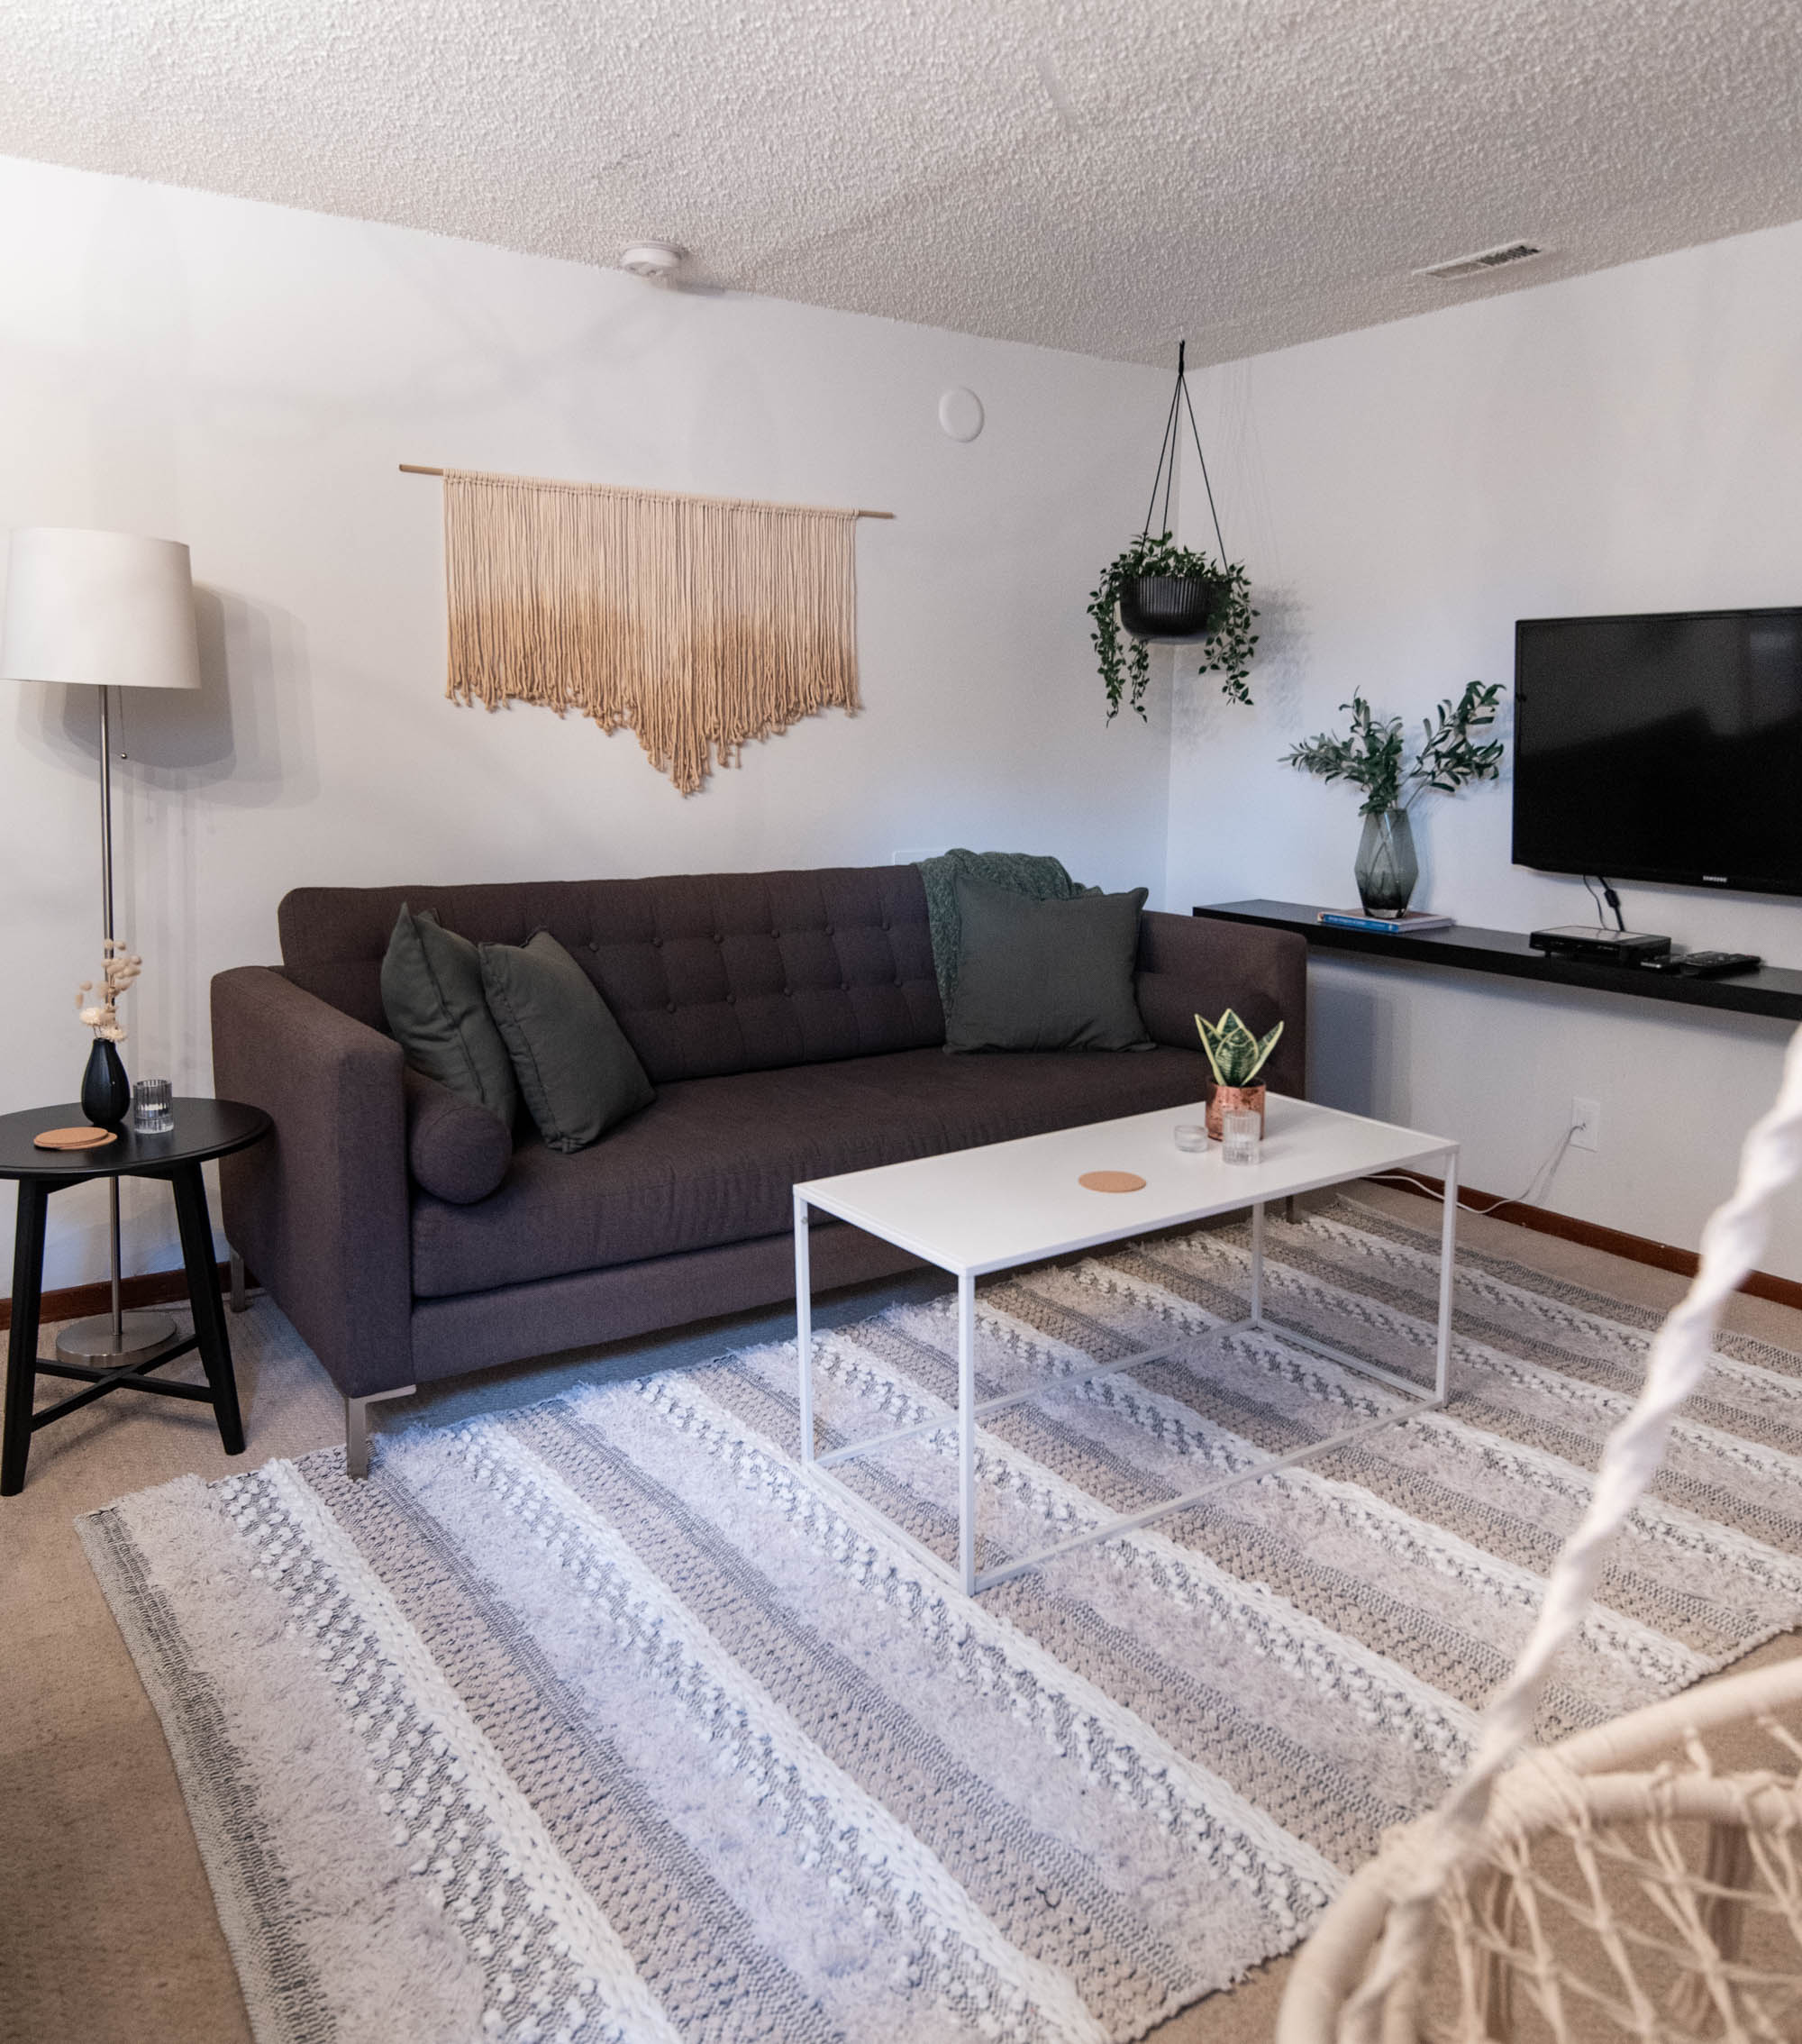 cozy basement suite update with hanging plant and macrame